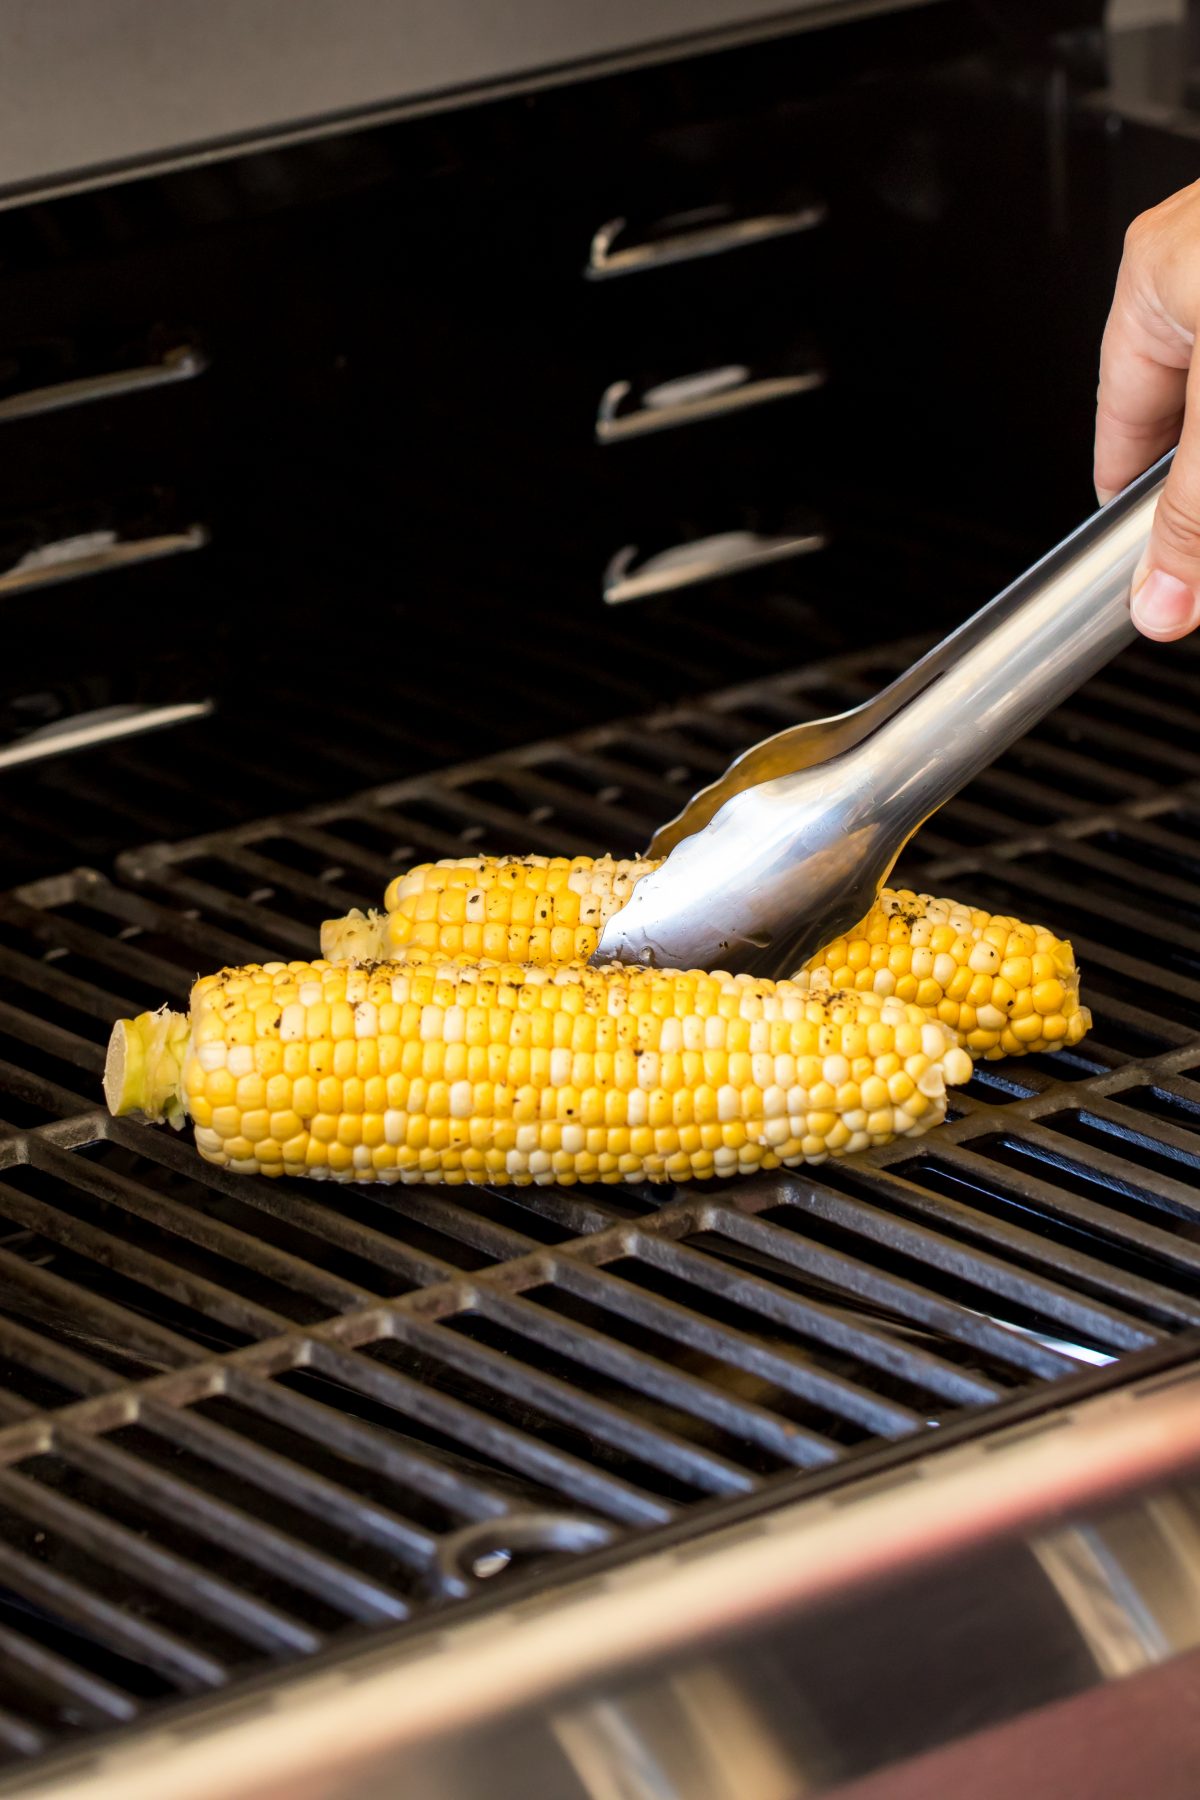 Place corn on the heated grill first